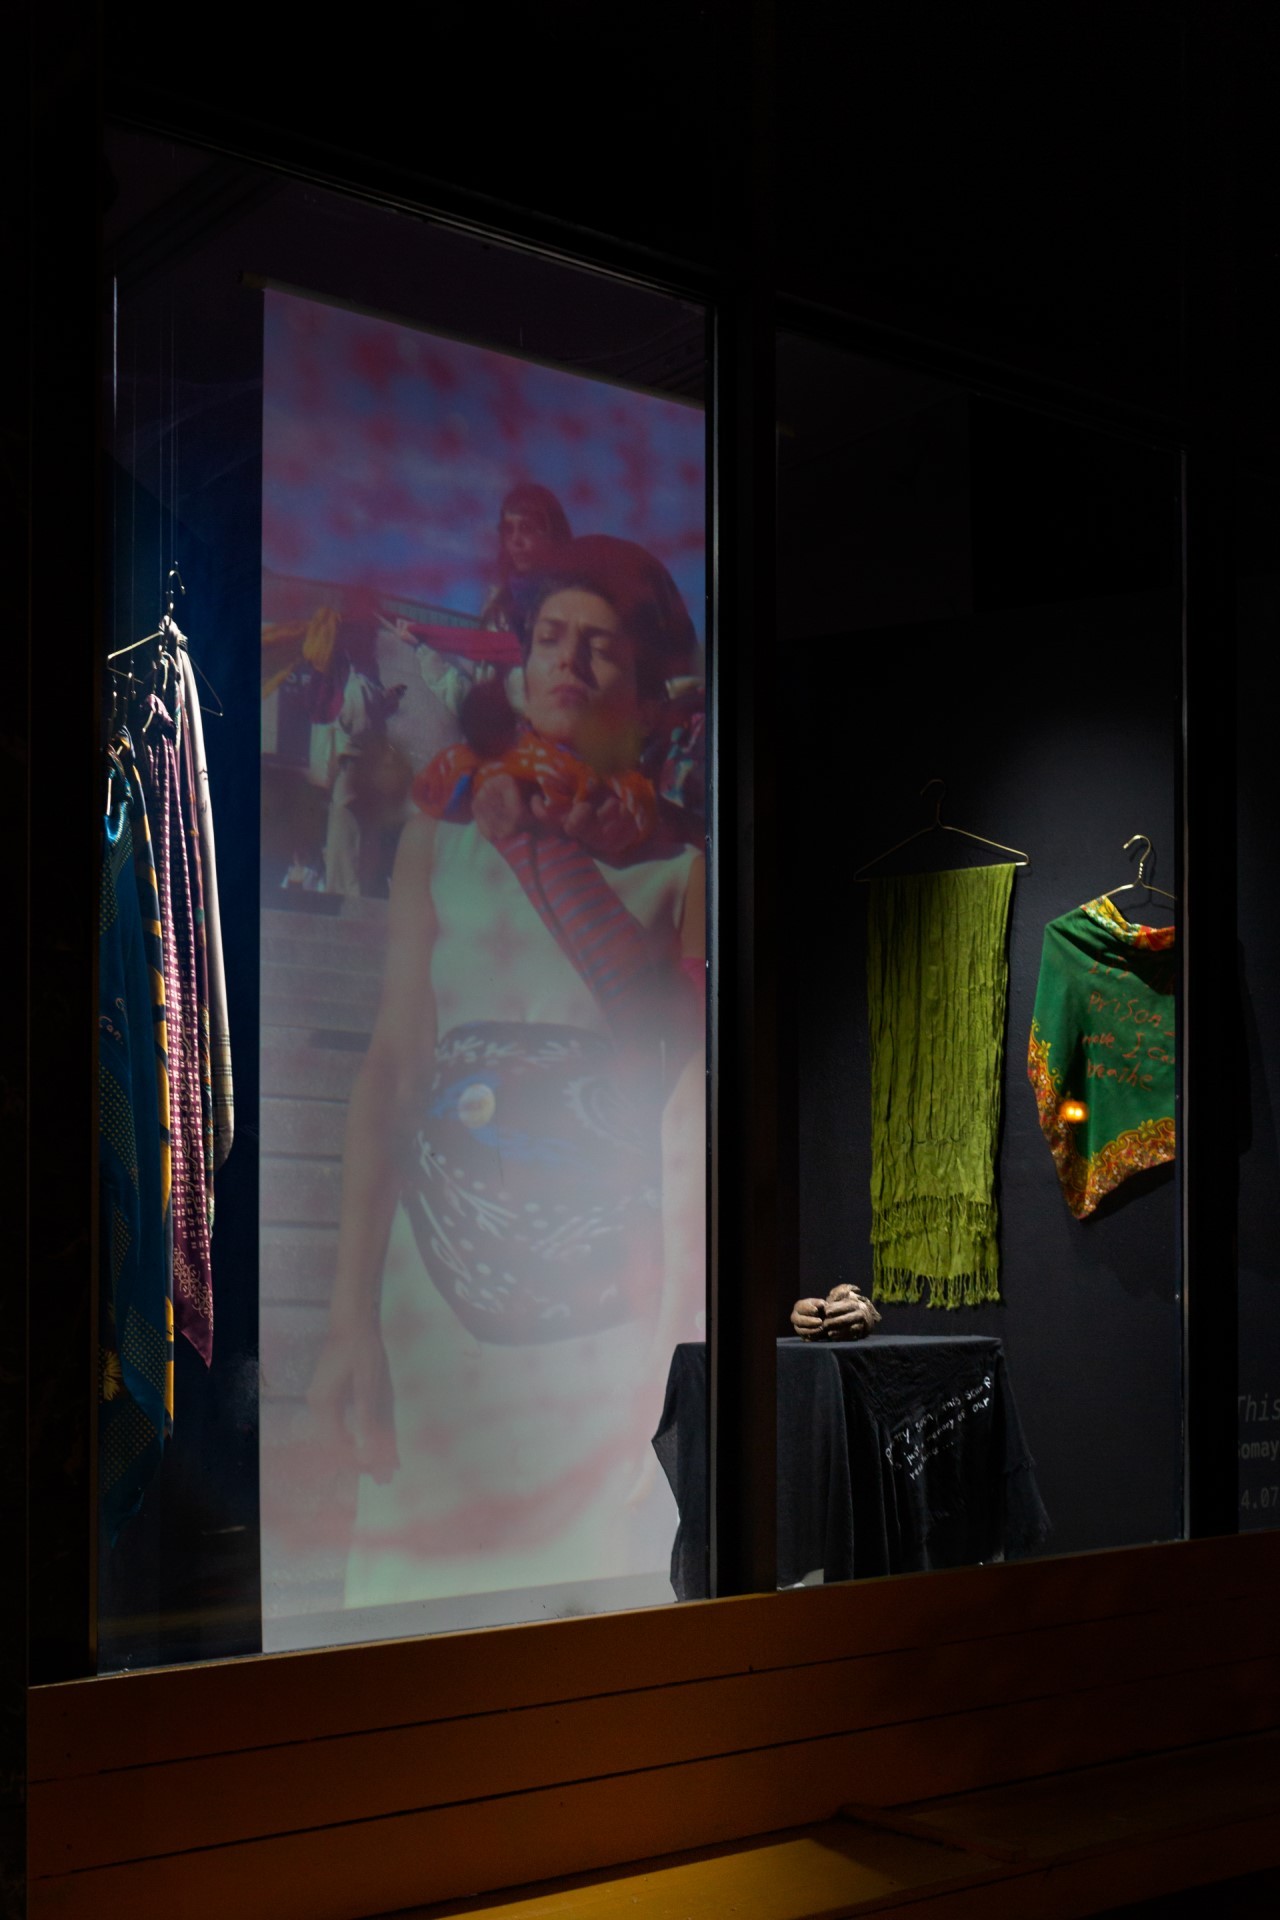 Documentation shot, prior installation of the work at La Central Power's front window. It showcases scarves hanging on the wall framing a projection of the artist performing and bronze casted hands displayed on a plinth. The hands are bound with a scarf. 